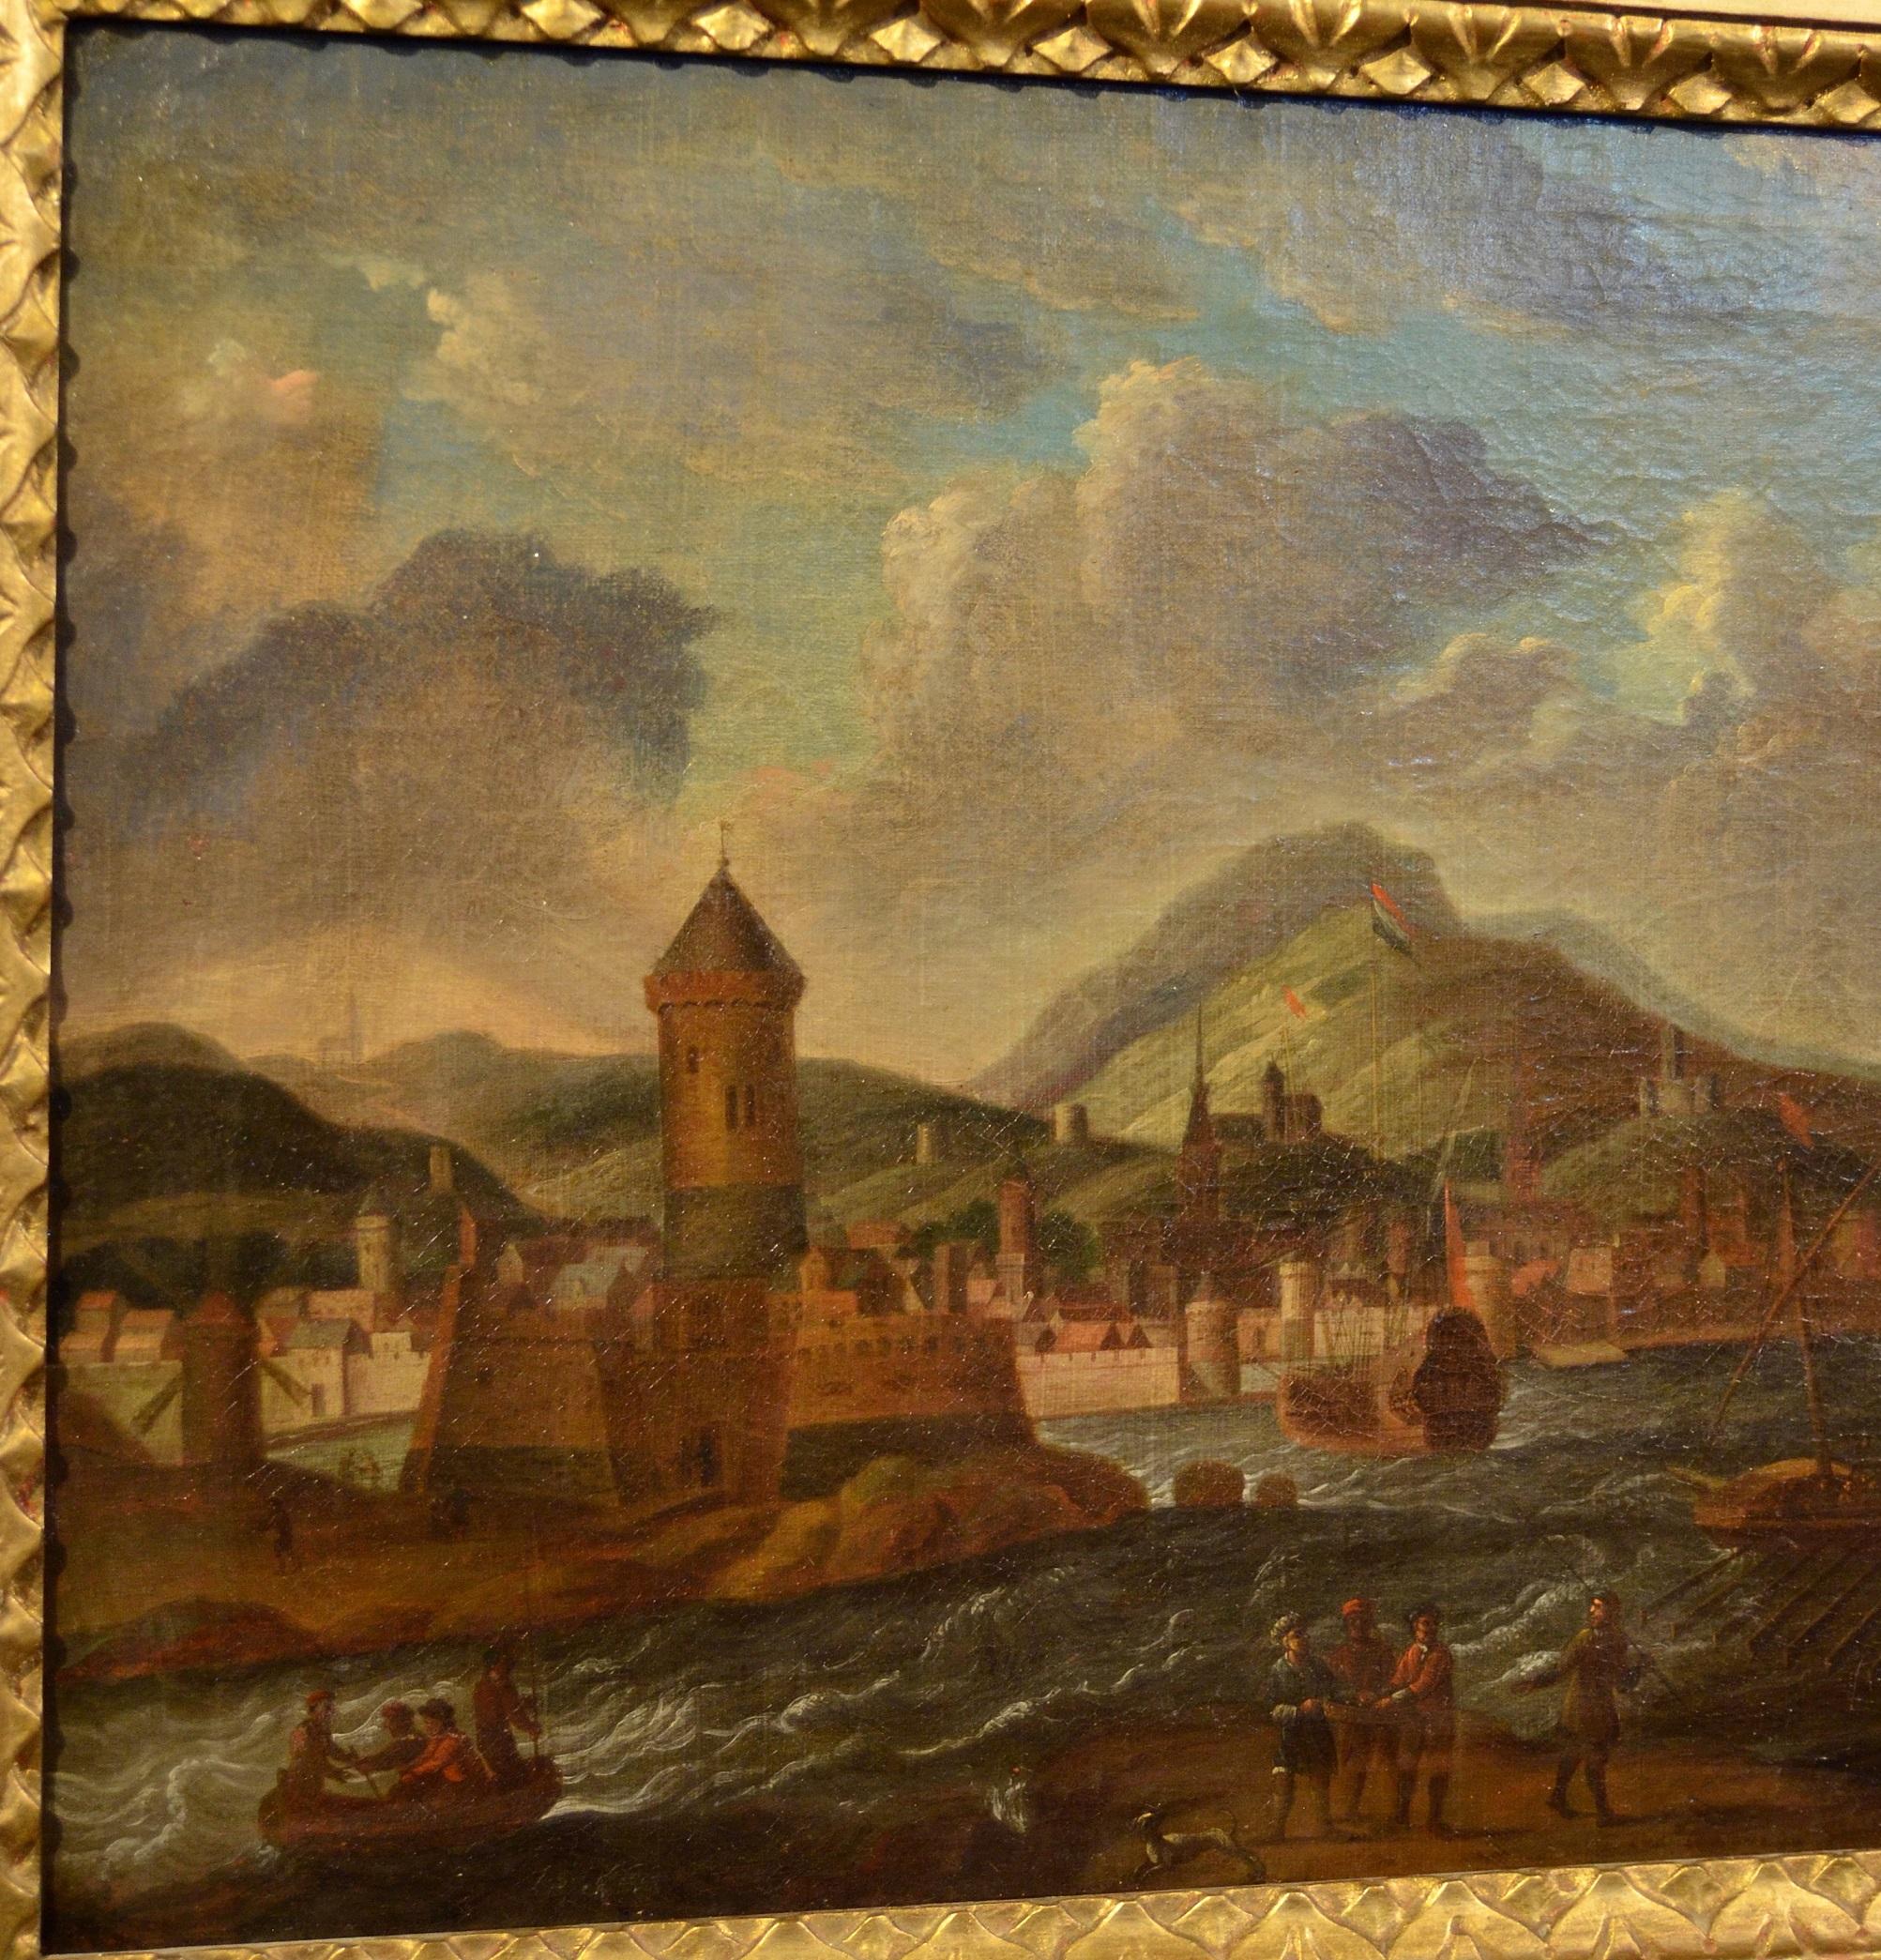 Paint Oil on canvas 17th Century Italy Mediterranean Landscapes Marina Flandre For Sale 4